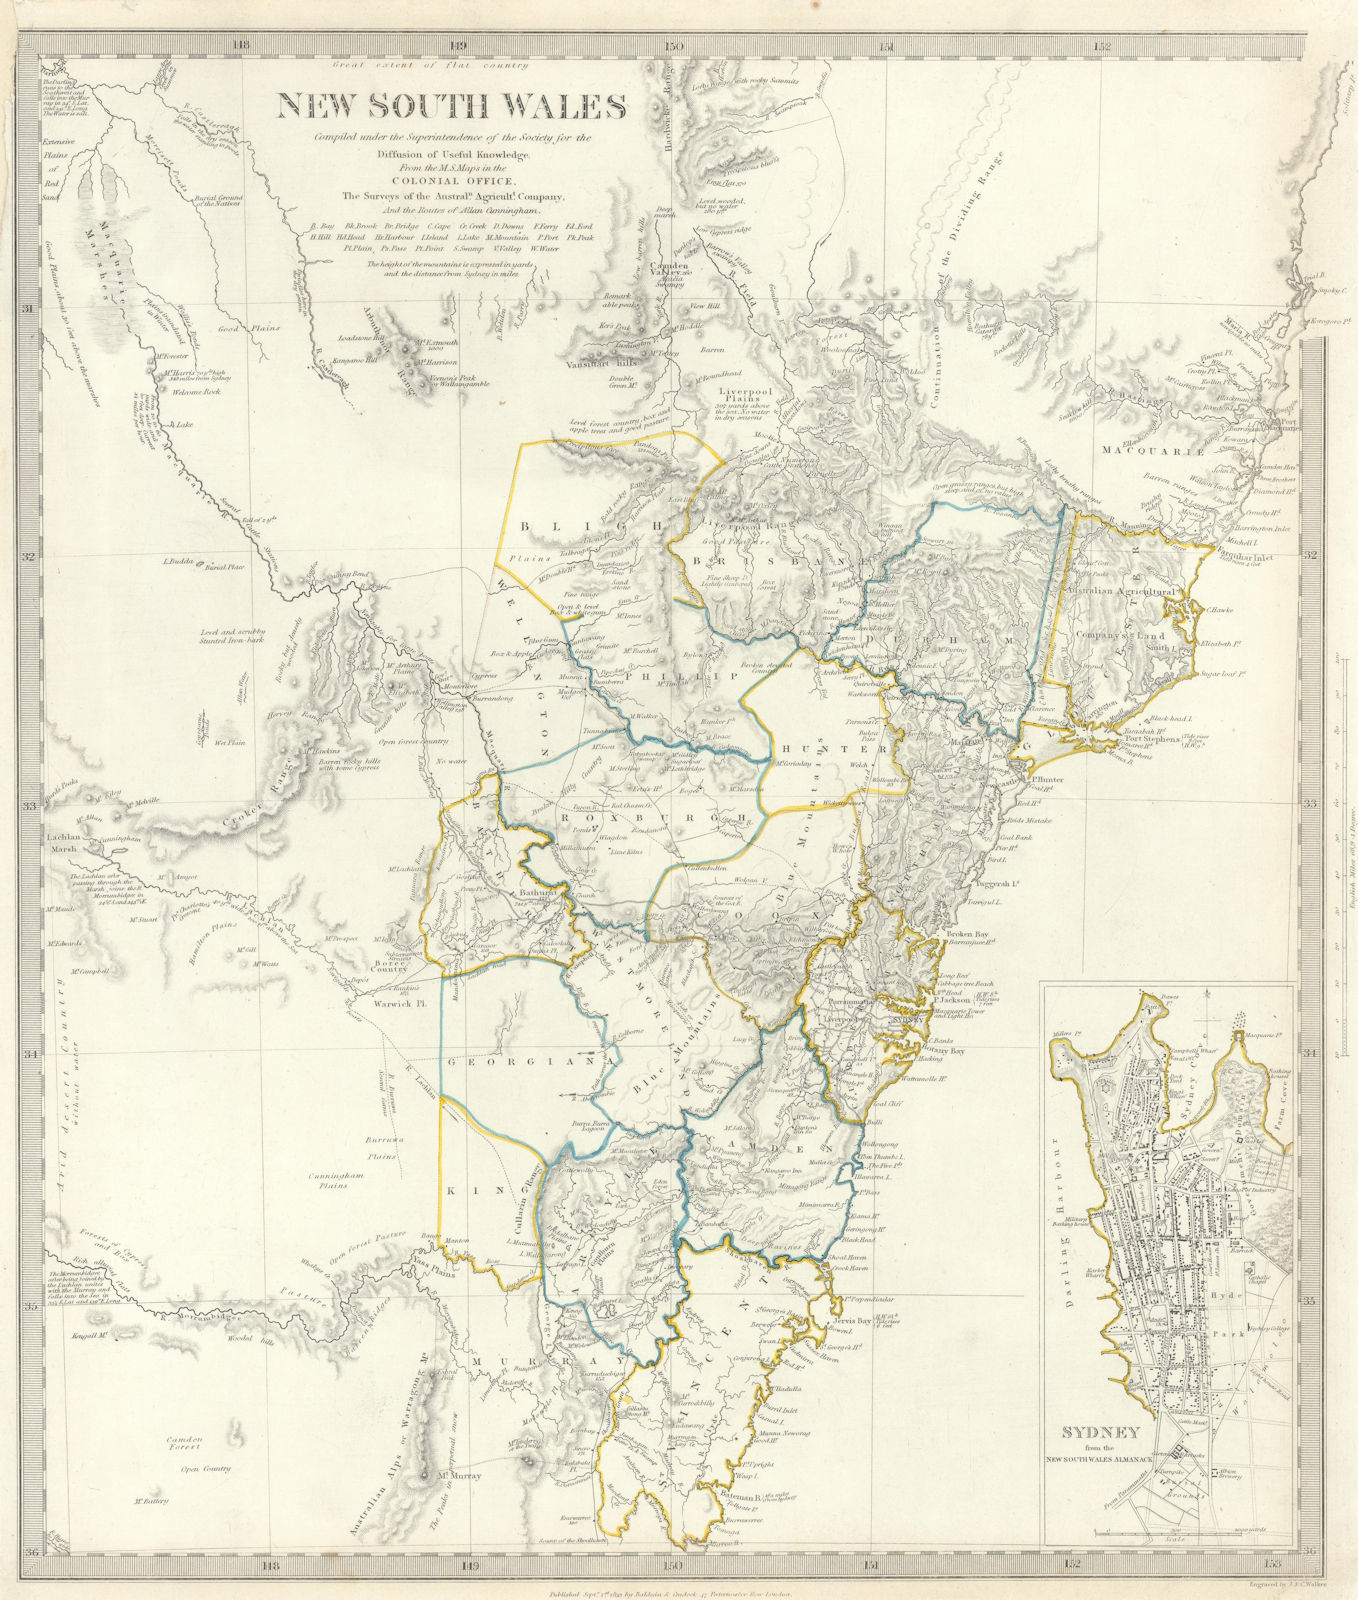 NEW SOUTH WALES. based on Cunningham routes. Inset Sydney plan. SDUK 1844 map